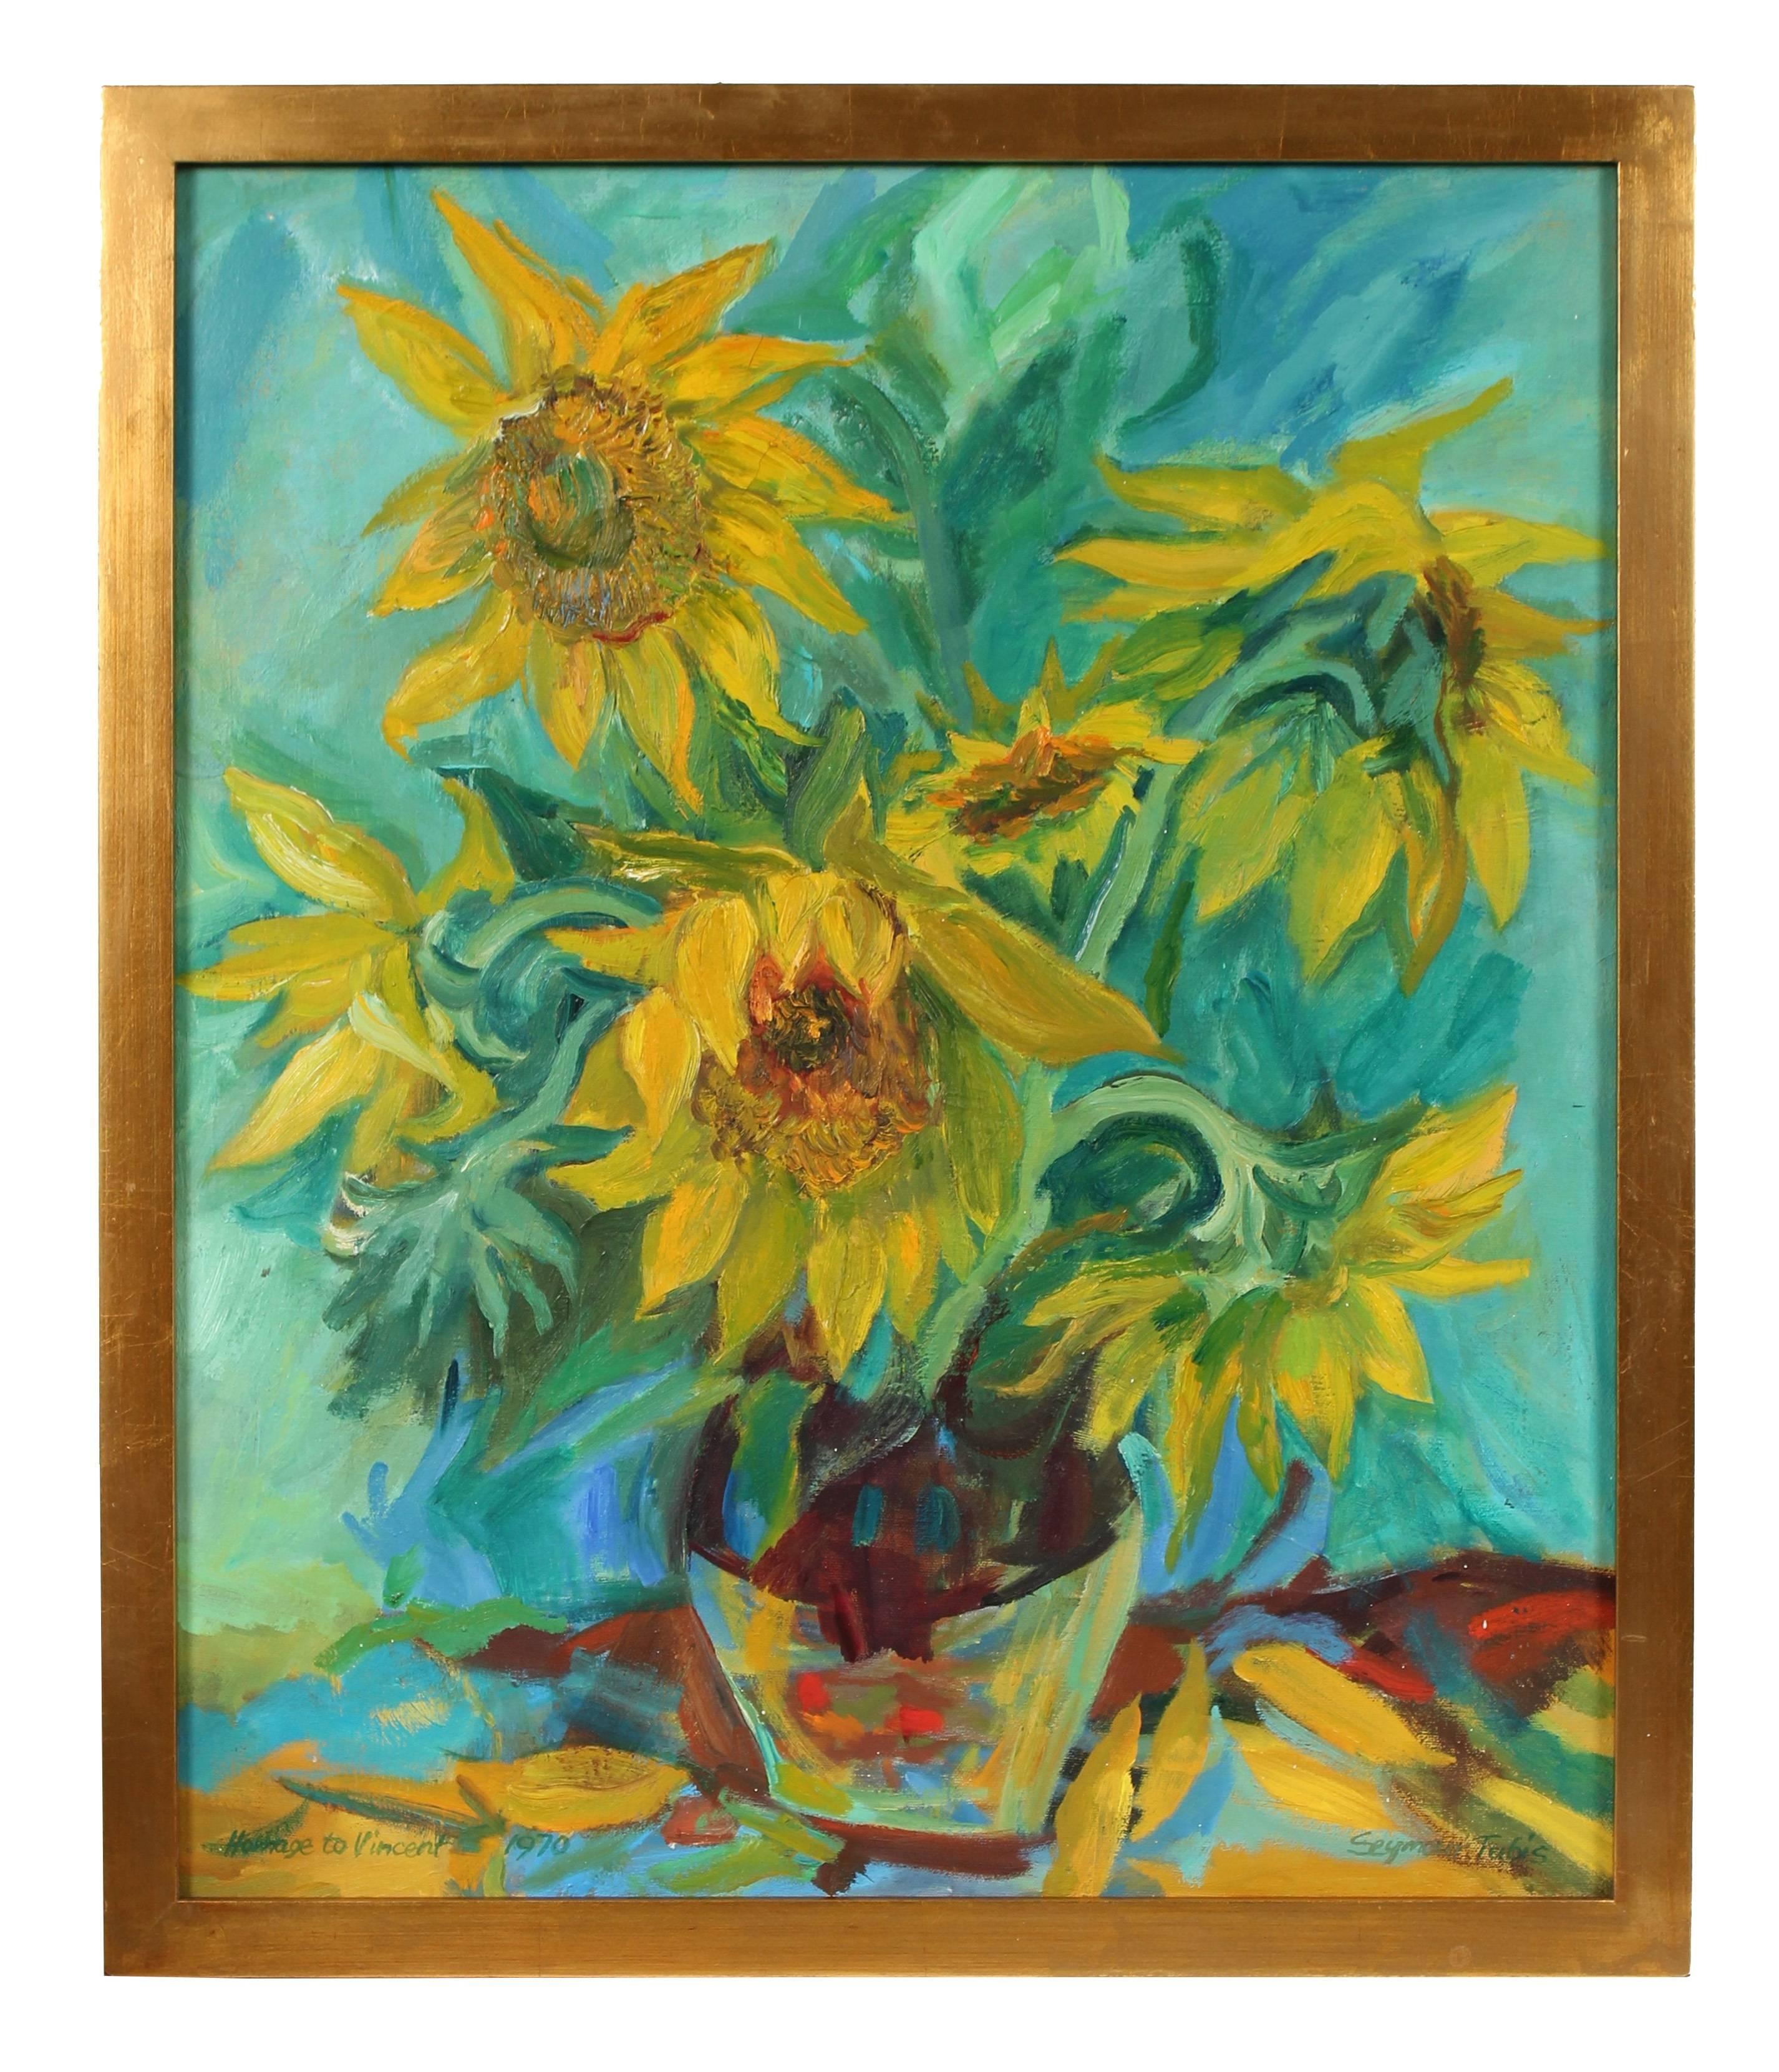 Seymour Tubis Still-Life Painting - "Sunflowers" Still Life in Oil, 1969